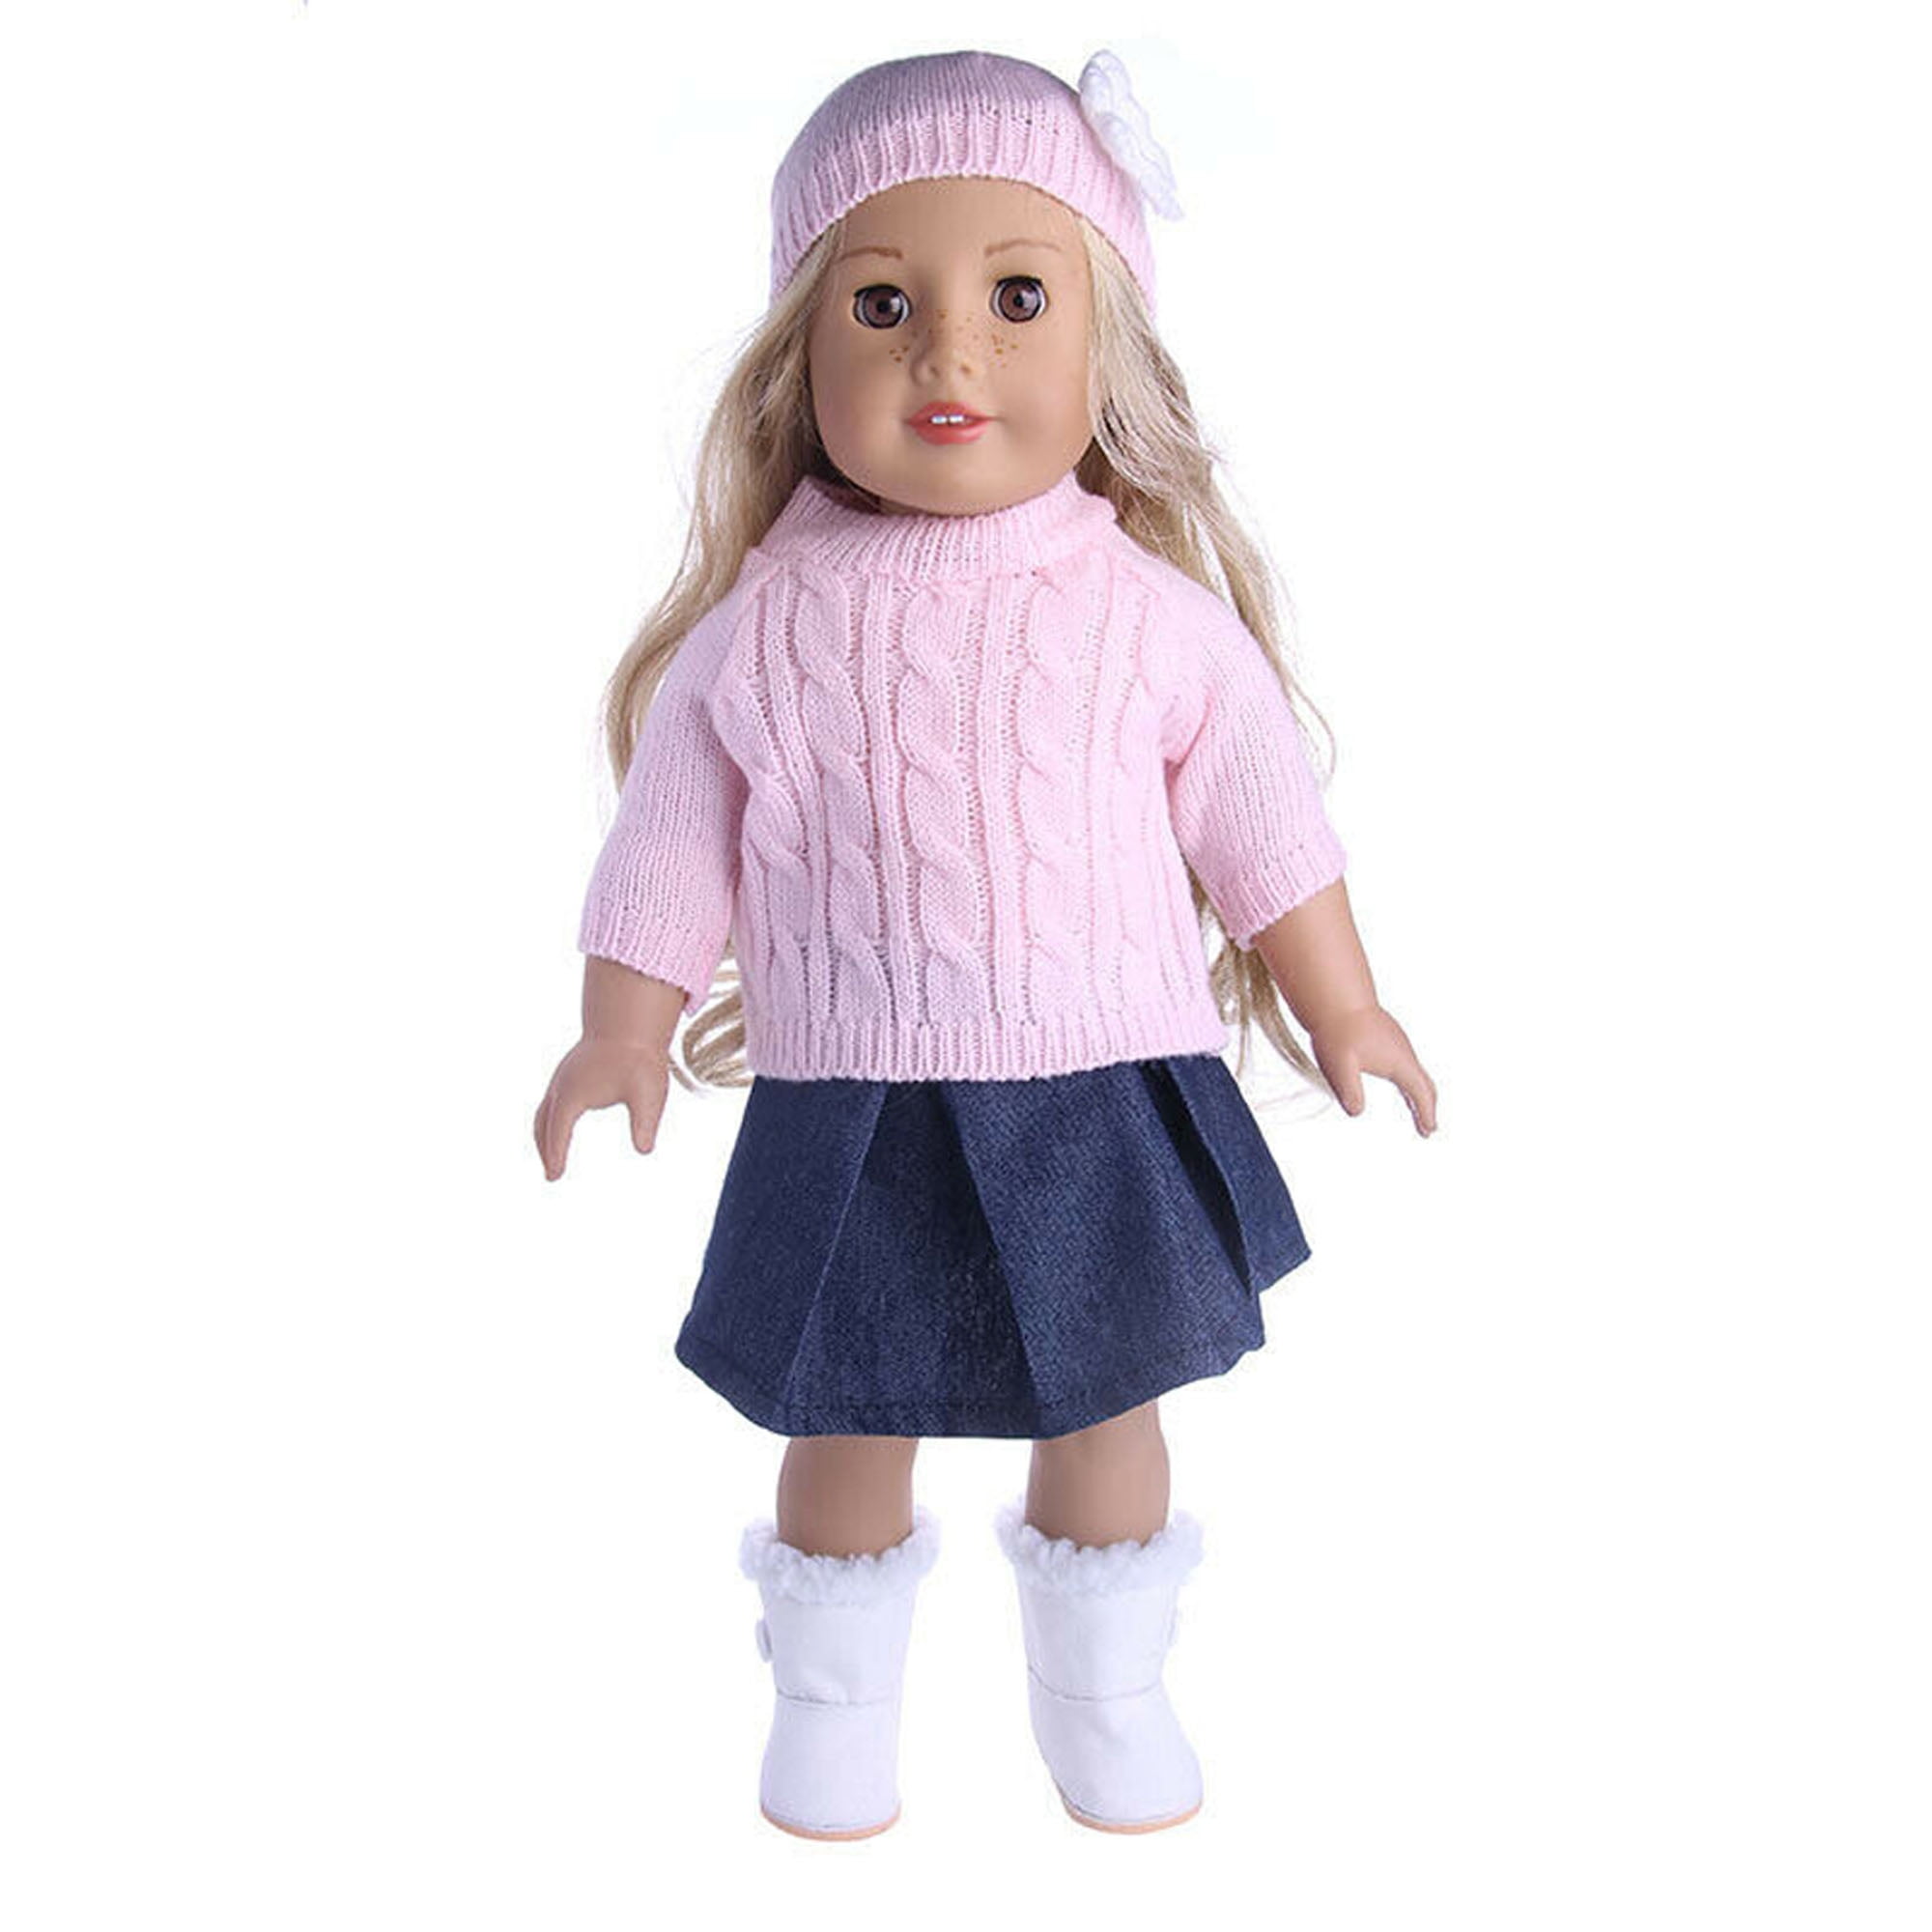 Hot Doctor's Doll Clothes Dress Skirt Hat Fit for 18 Inch Baby Girl Dolls Gifts 